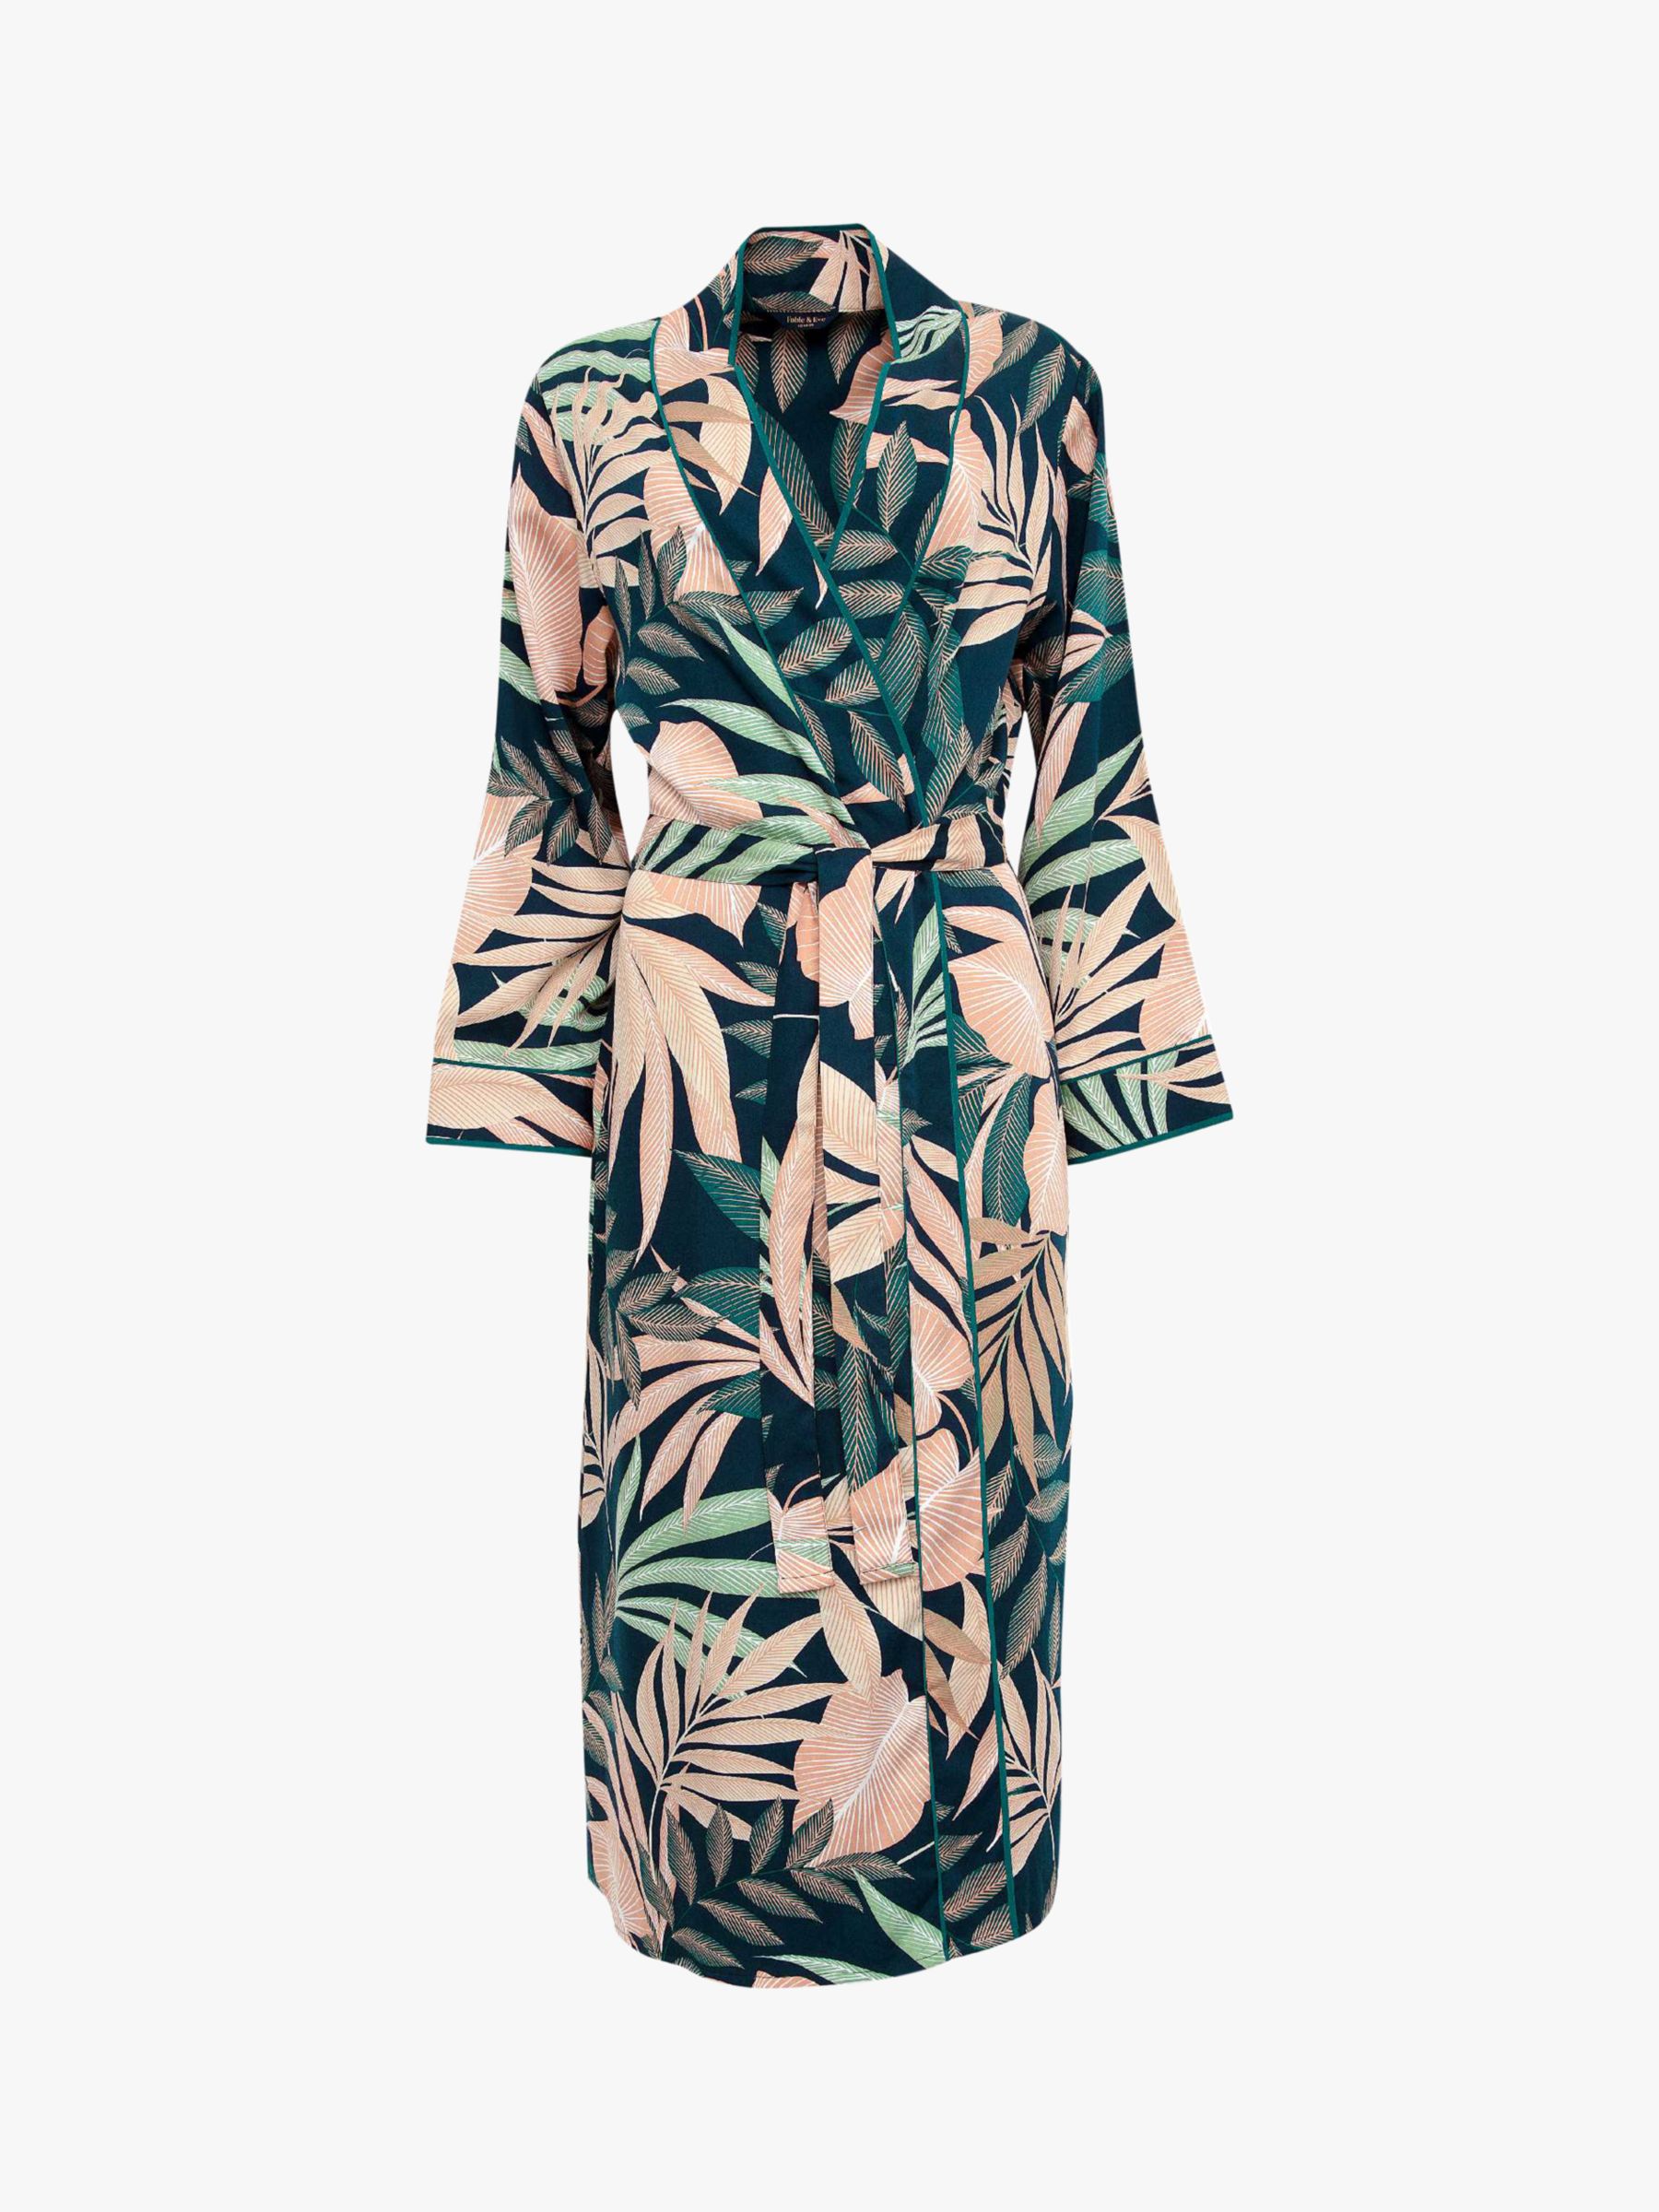 Buy Fable & Eve Leaf Print Dressing Gown, Navy Mix Online at johnlewis.com